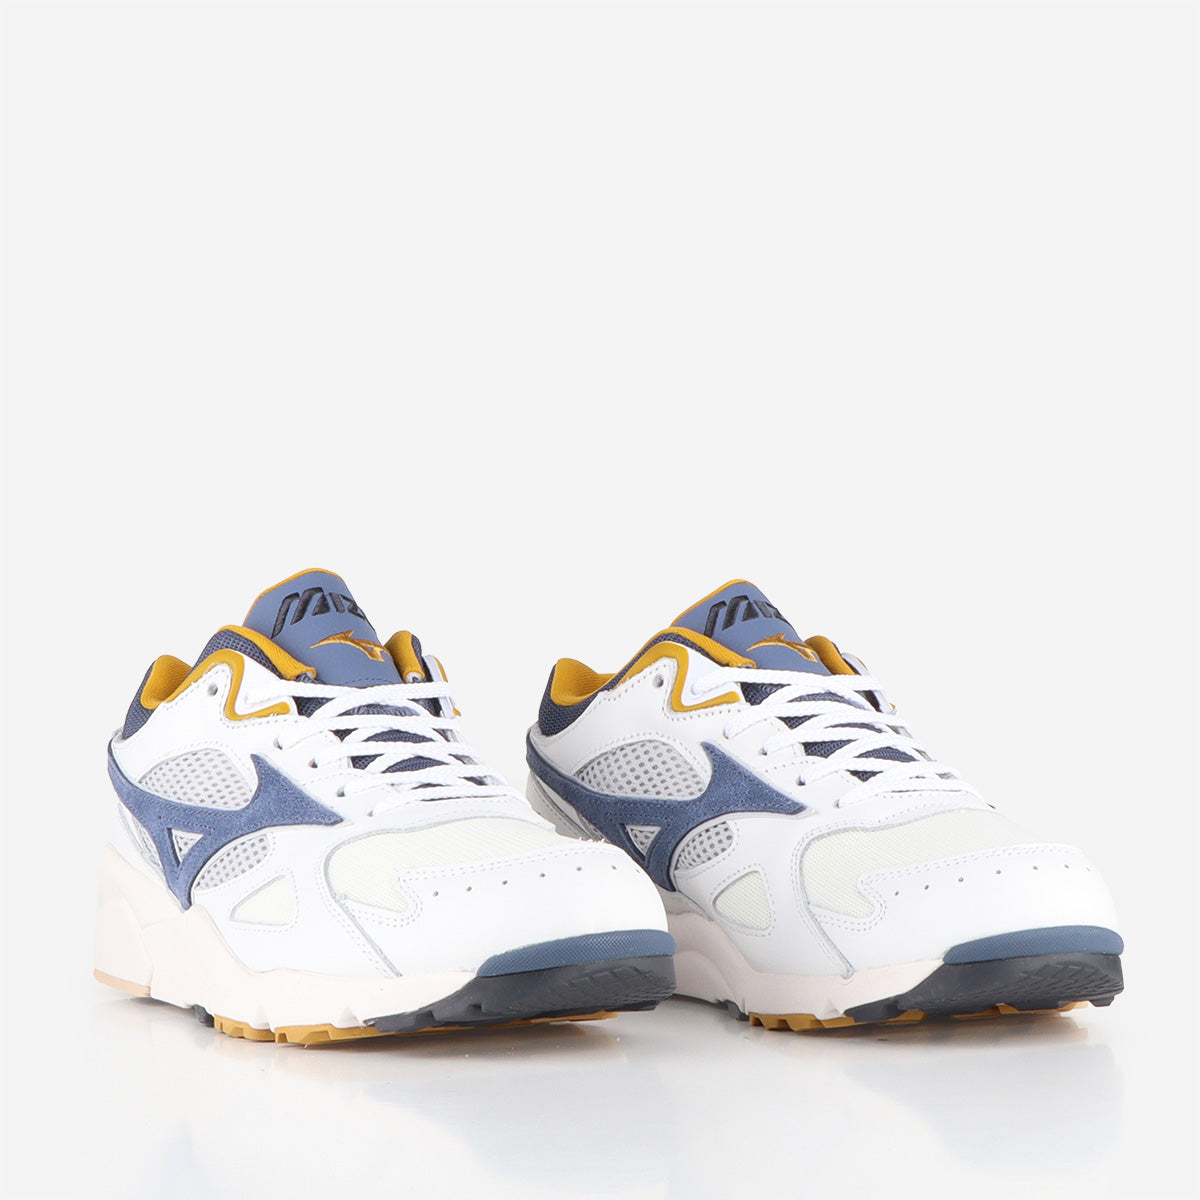 Mizuno Sky Medal 'Age of Legends' Shoes